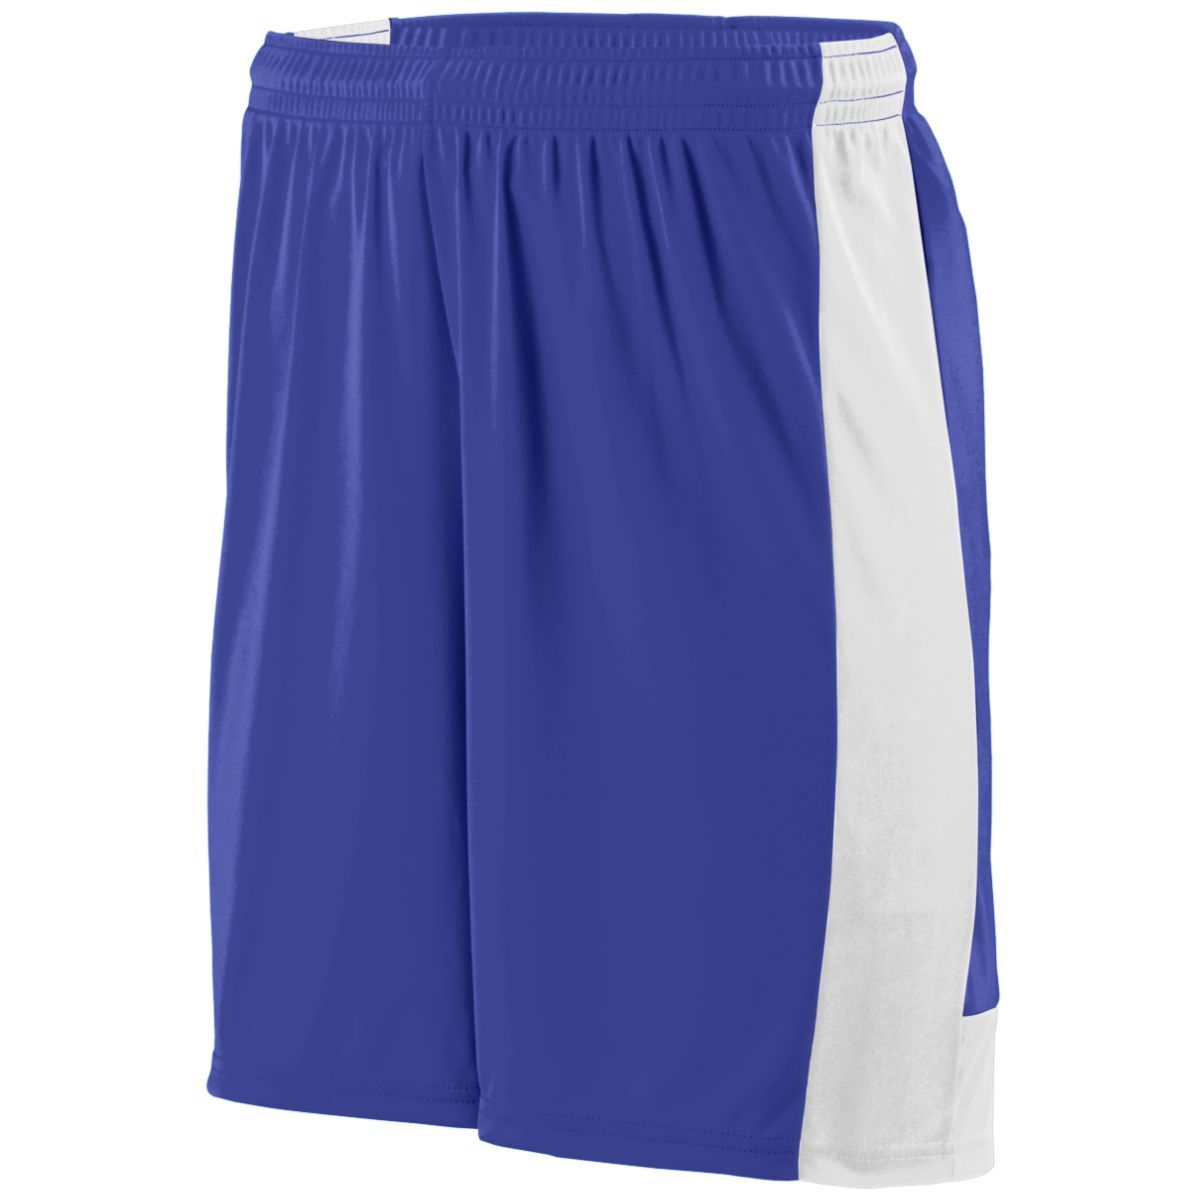 Augusta Sportswear Youth Lightning Shorts in Purple/White  -Part of the Youth, Youth-Shorts, Augusta-Products, Soccer, All-Sports-1 product lines at KanaleyCreations.com